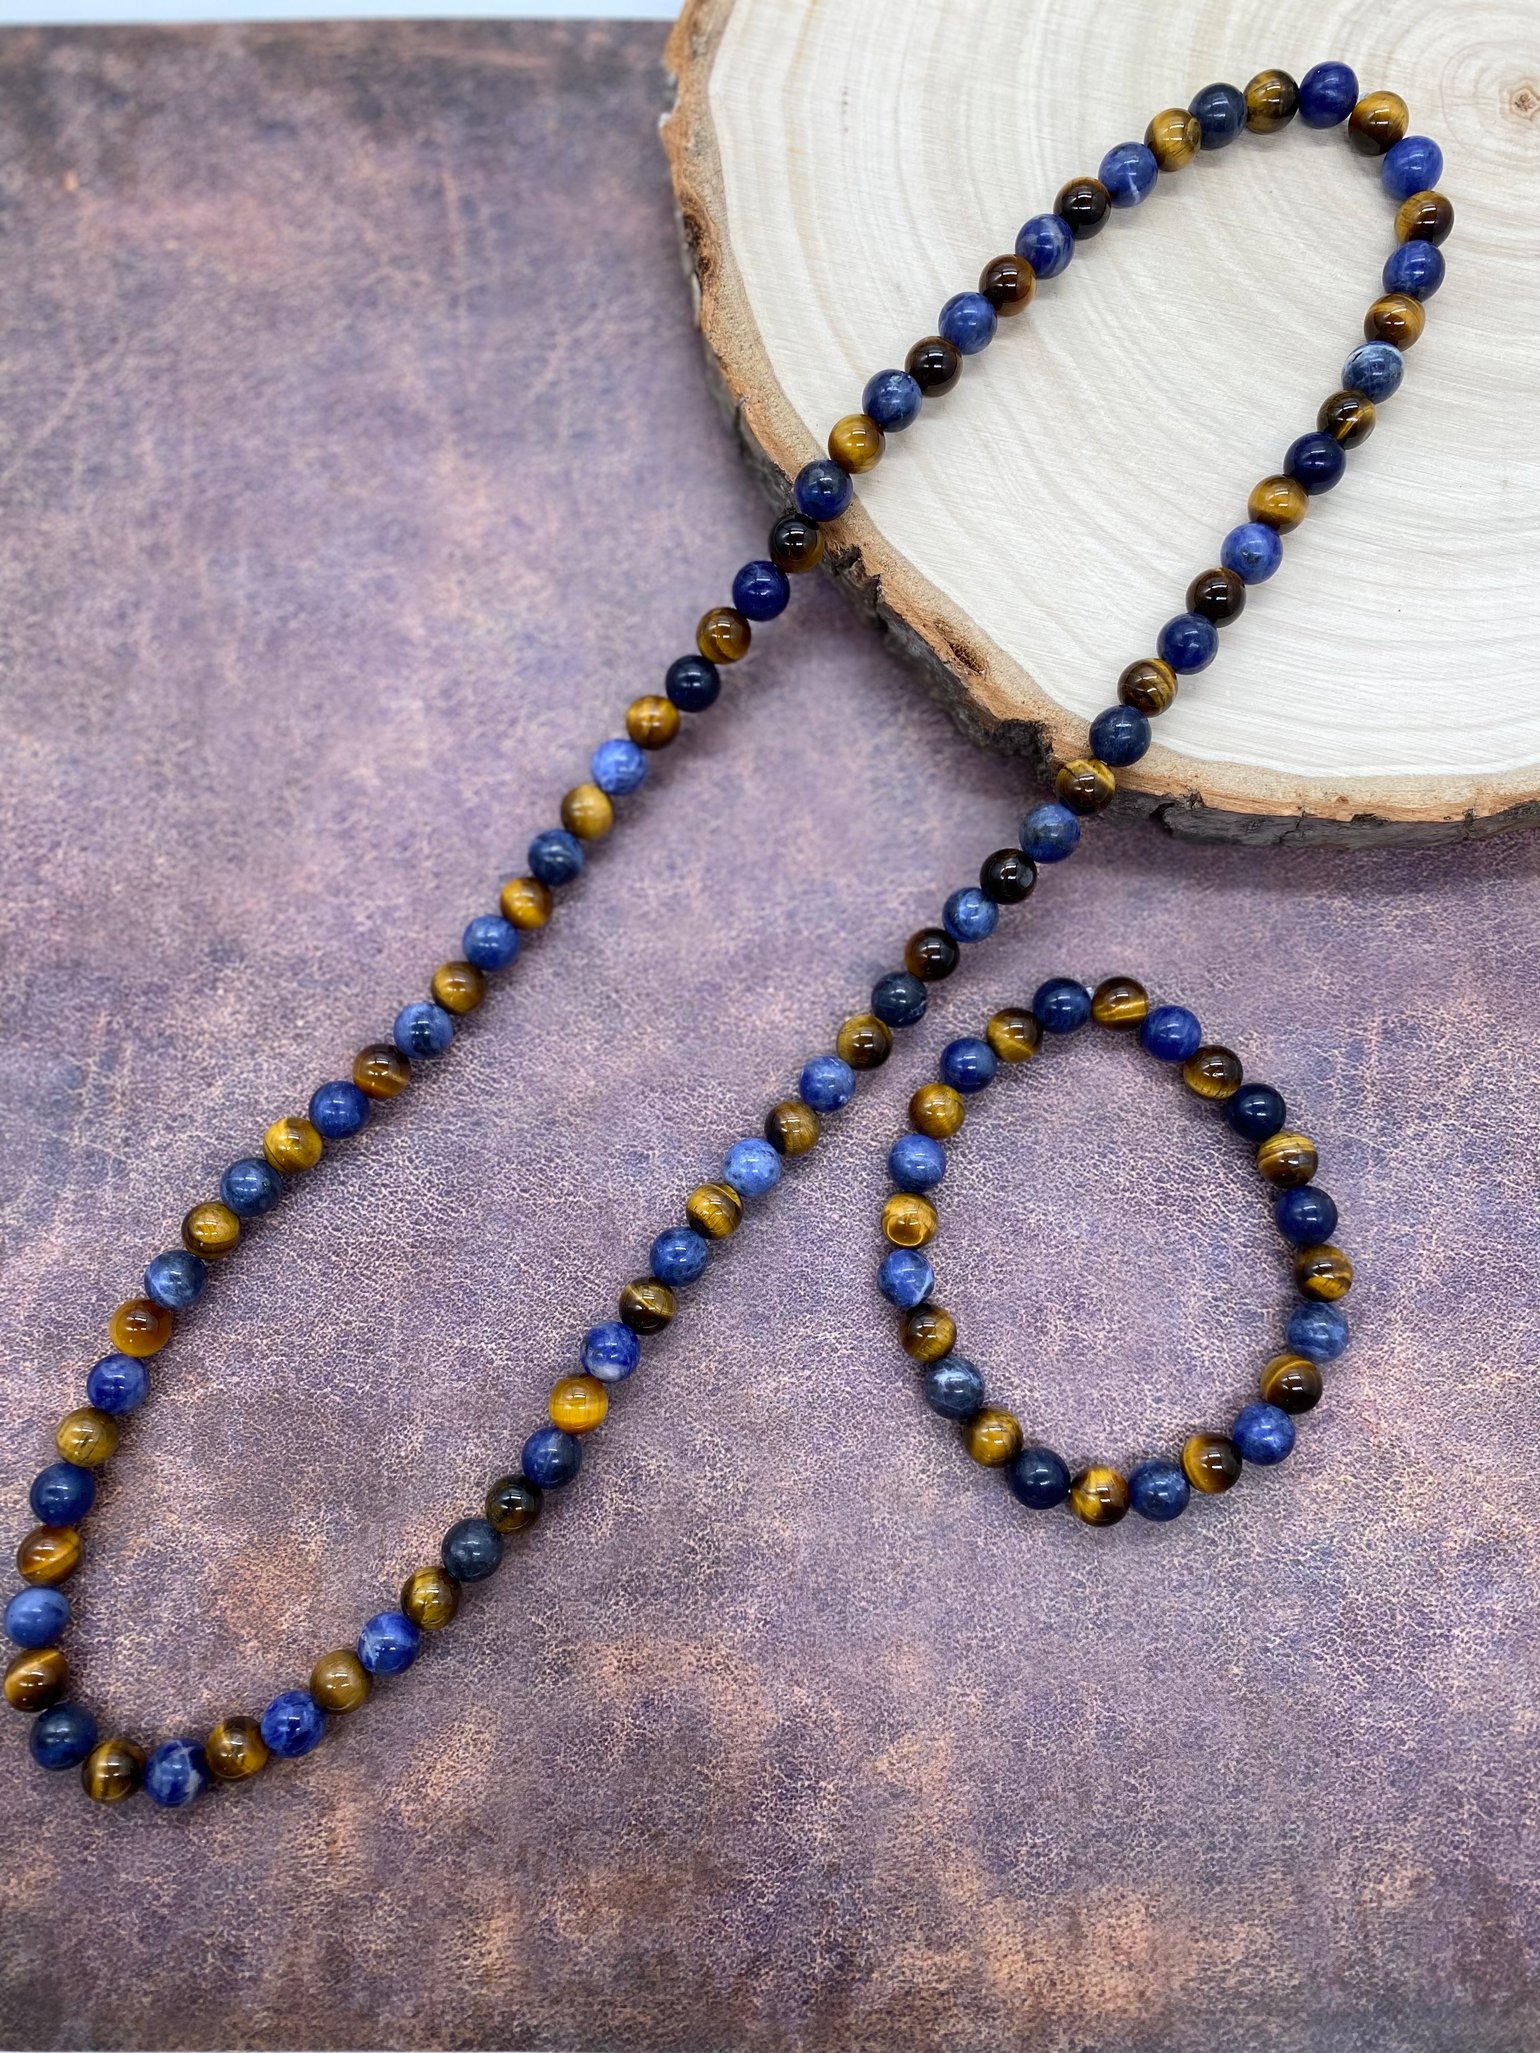 Image of “Passion & Purpose” Necklace and Bracelet 8mm Sodalite & Tigers Eye Set